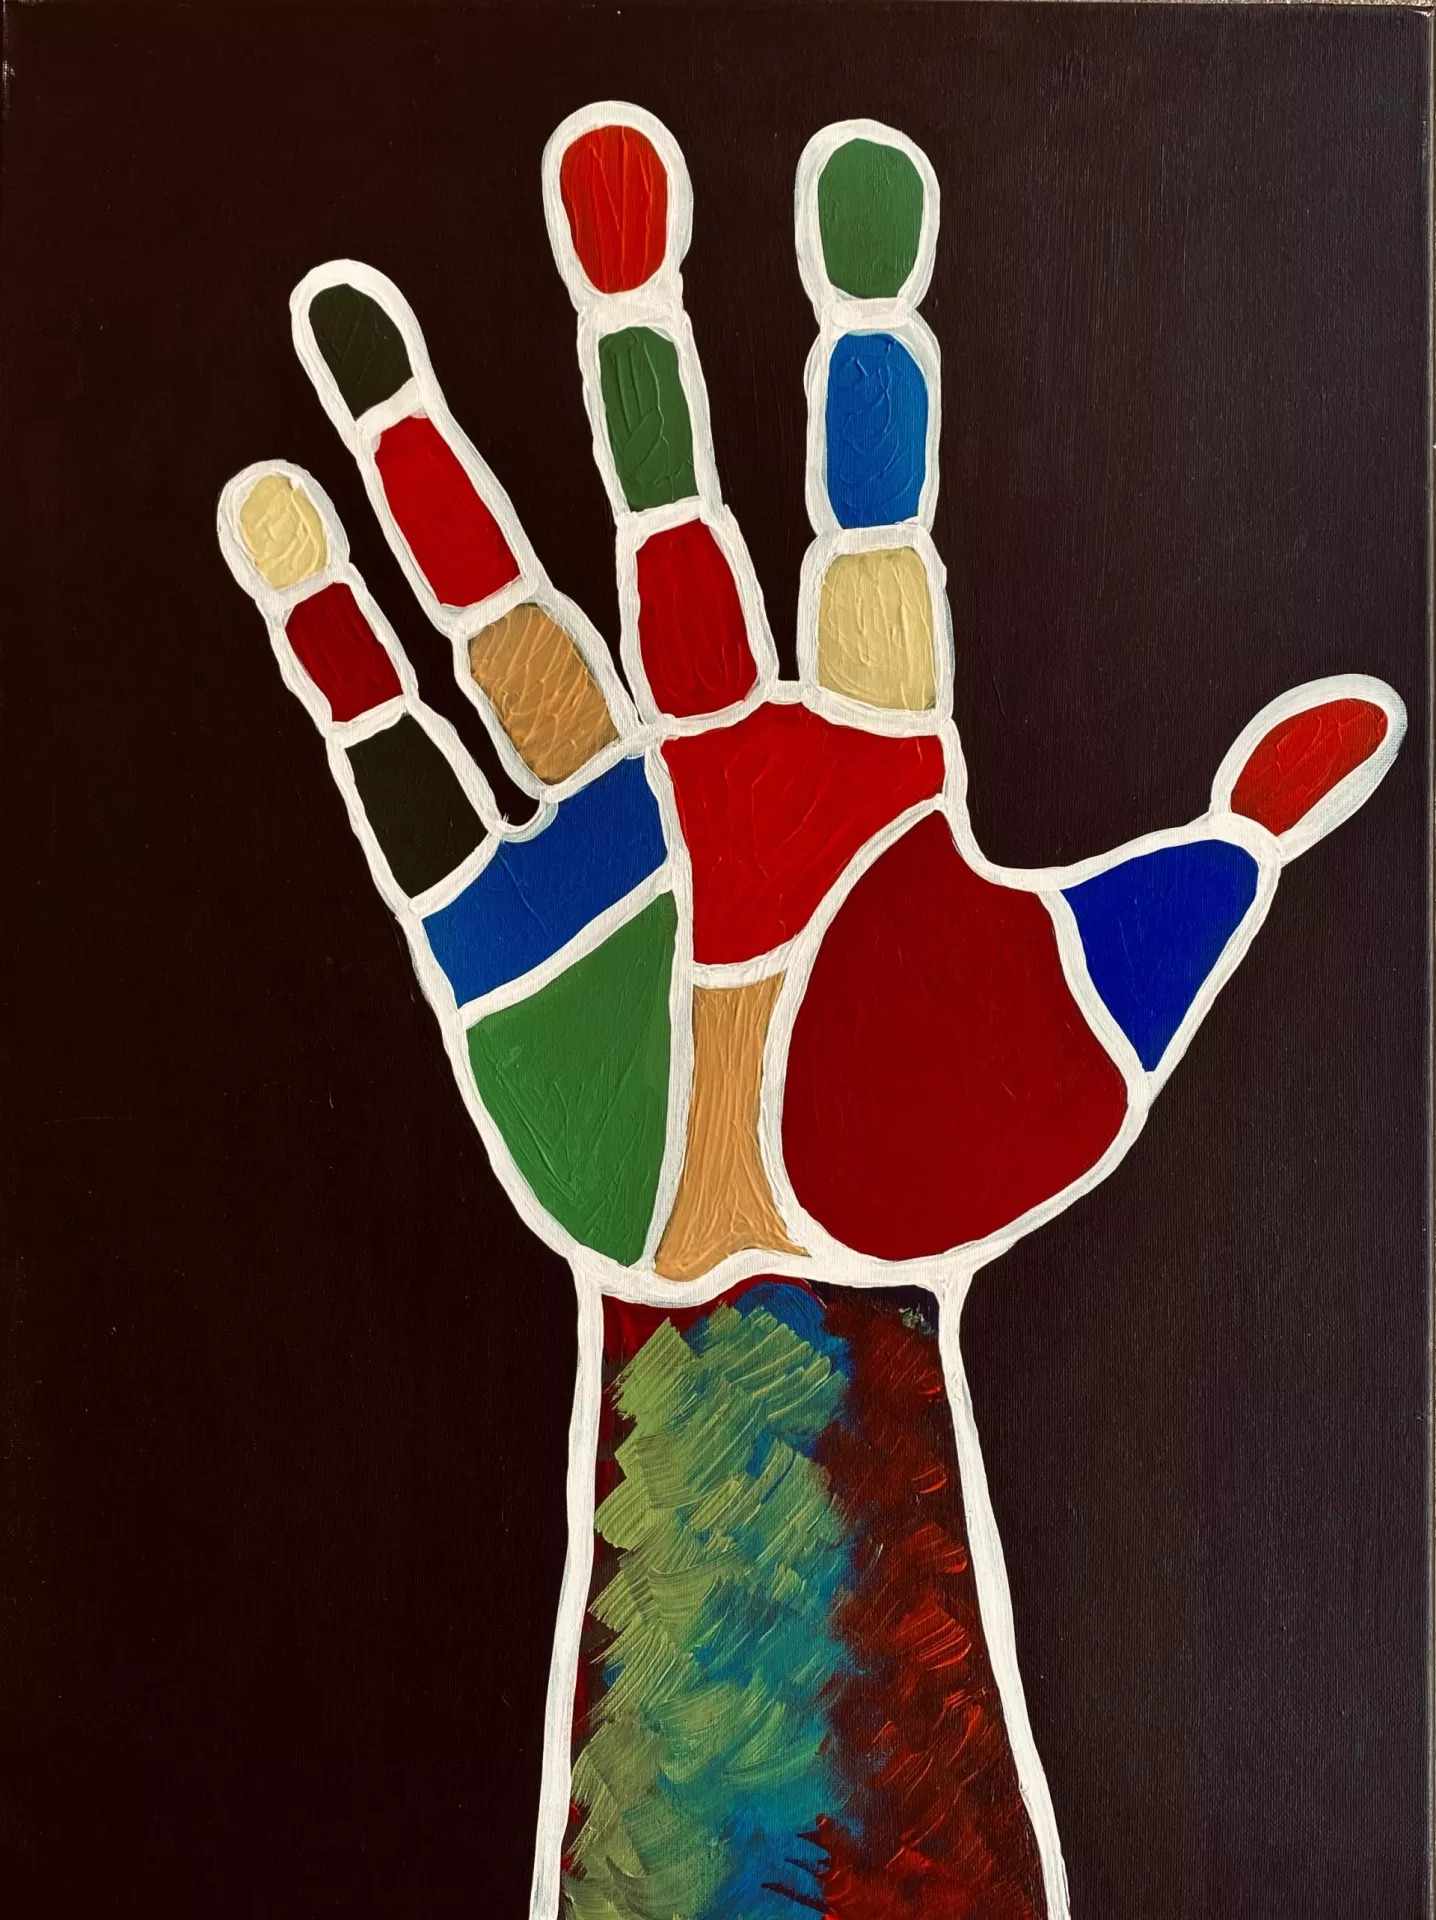 A black background contrasts with the multicolored segments of an open hand that is outlined with a bold white borders. It represents that we are all one and different.